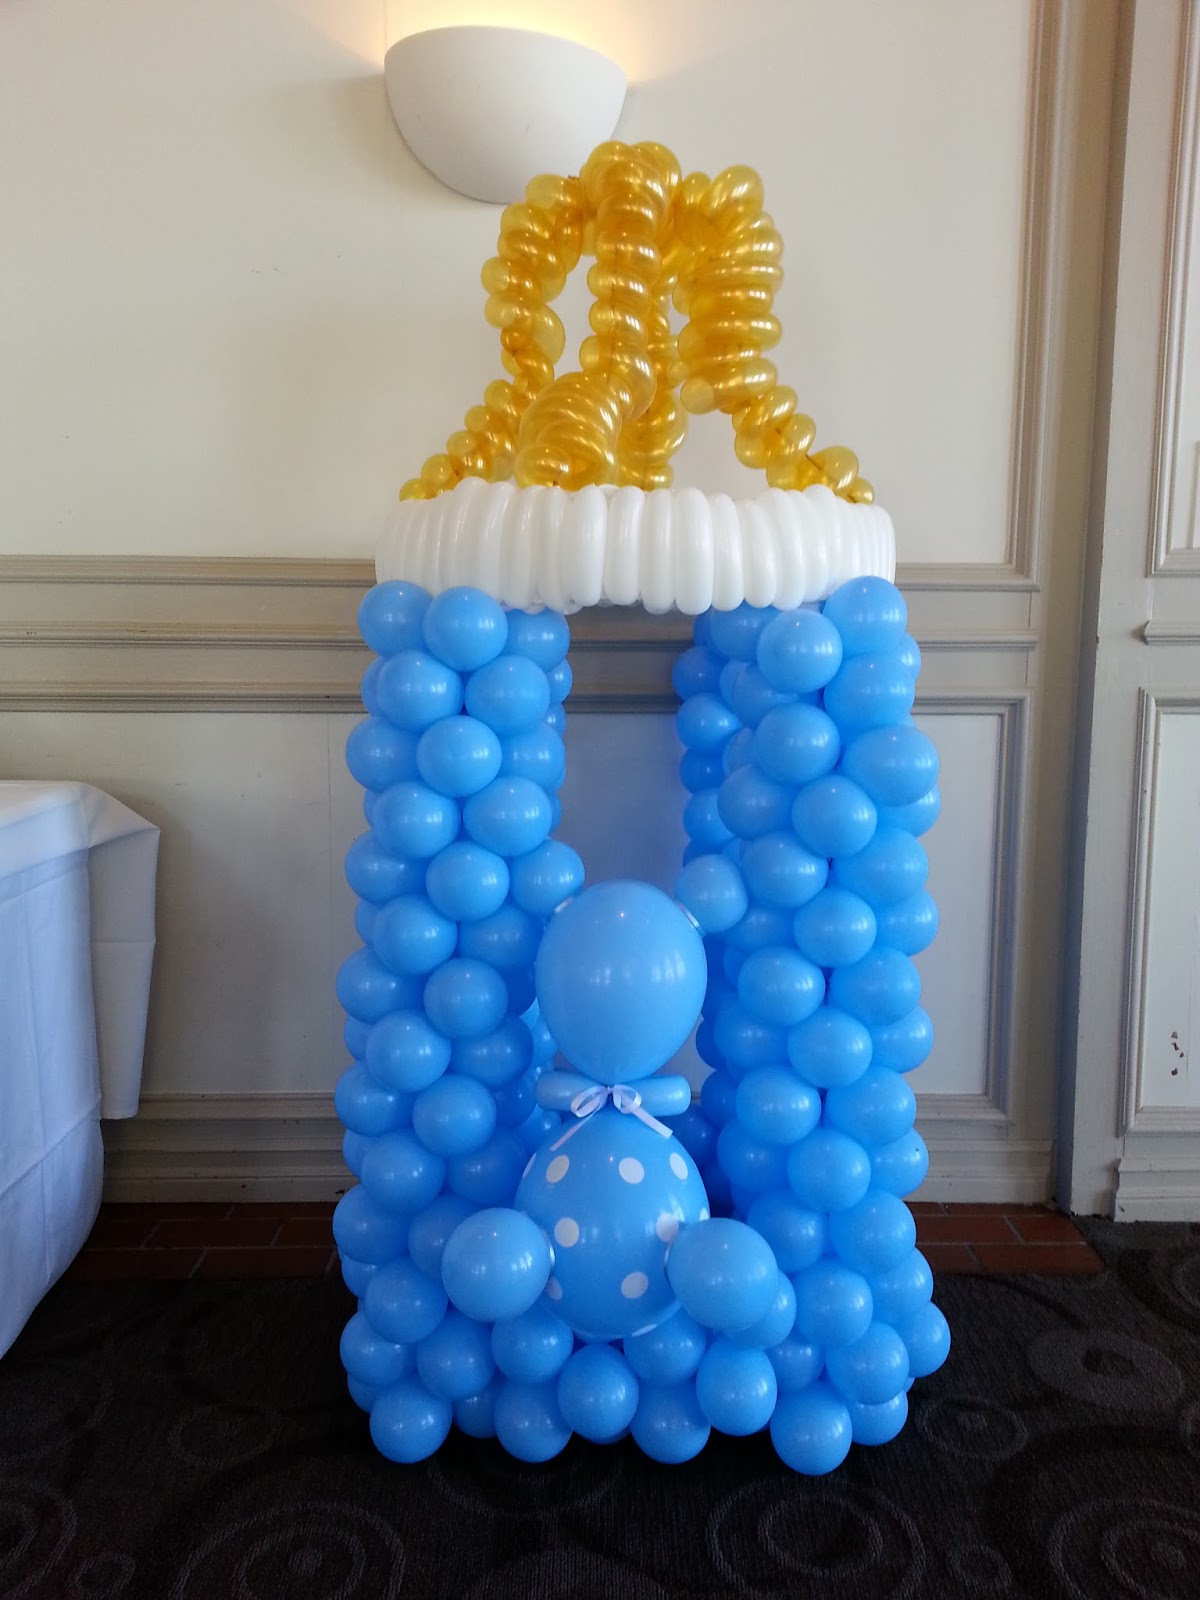 Baby Shower Ideas For Boys Decorations
 PoP Balloons A baby shower for a boy